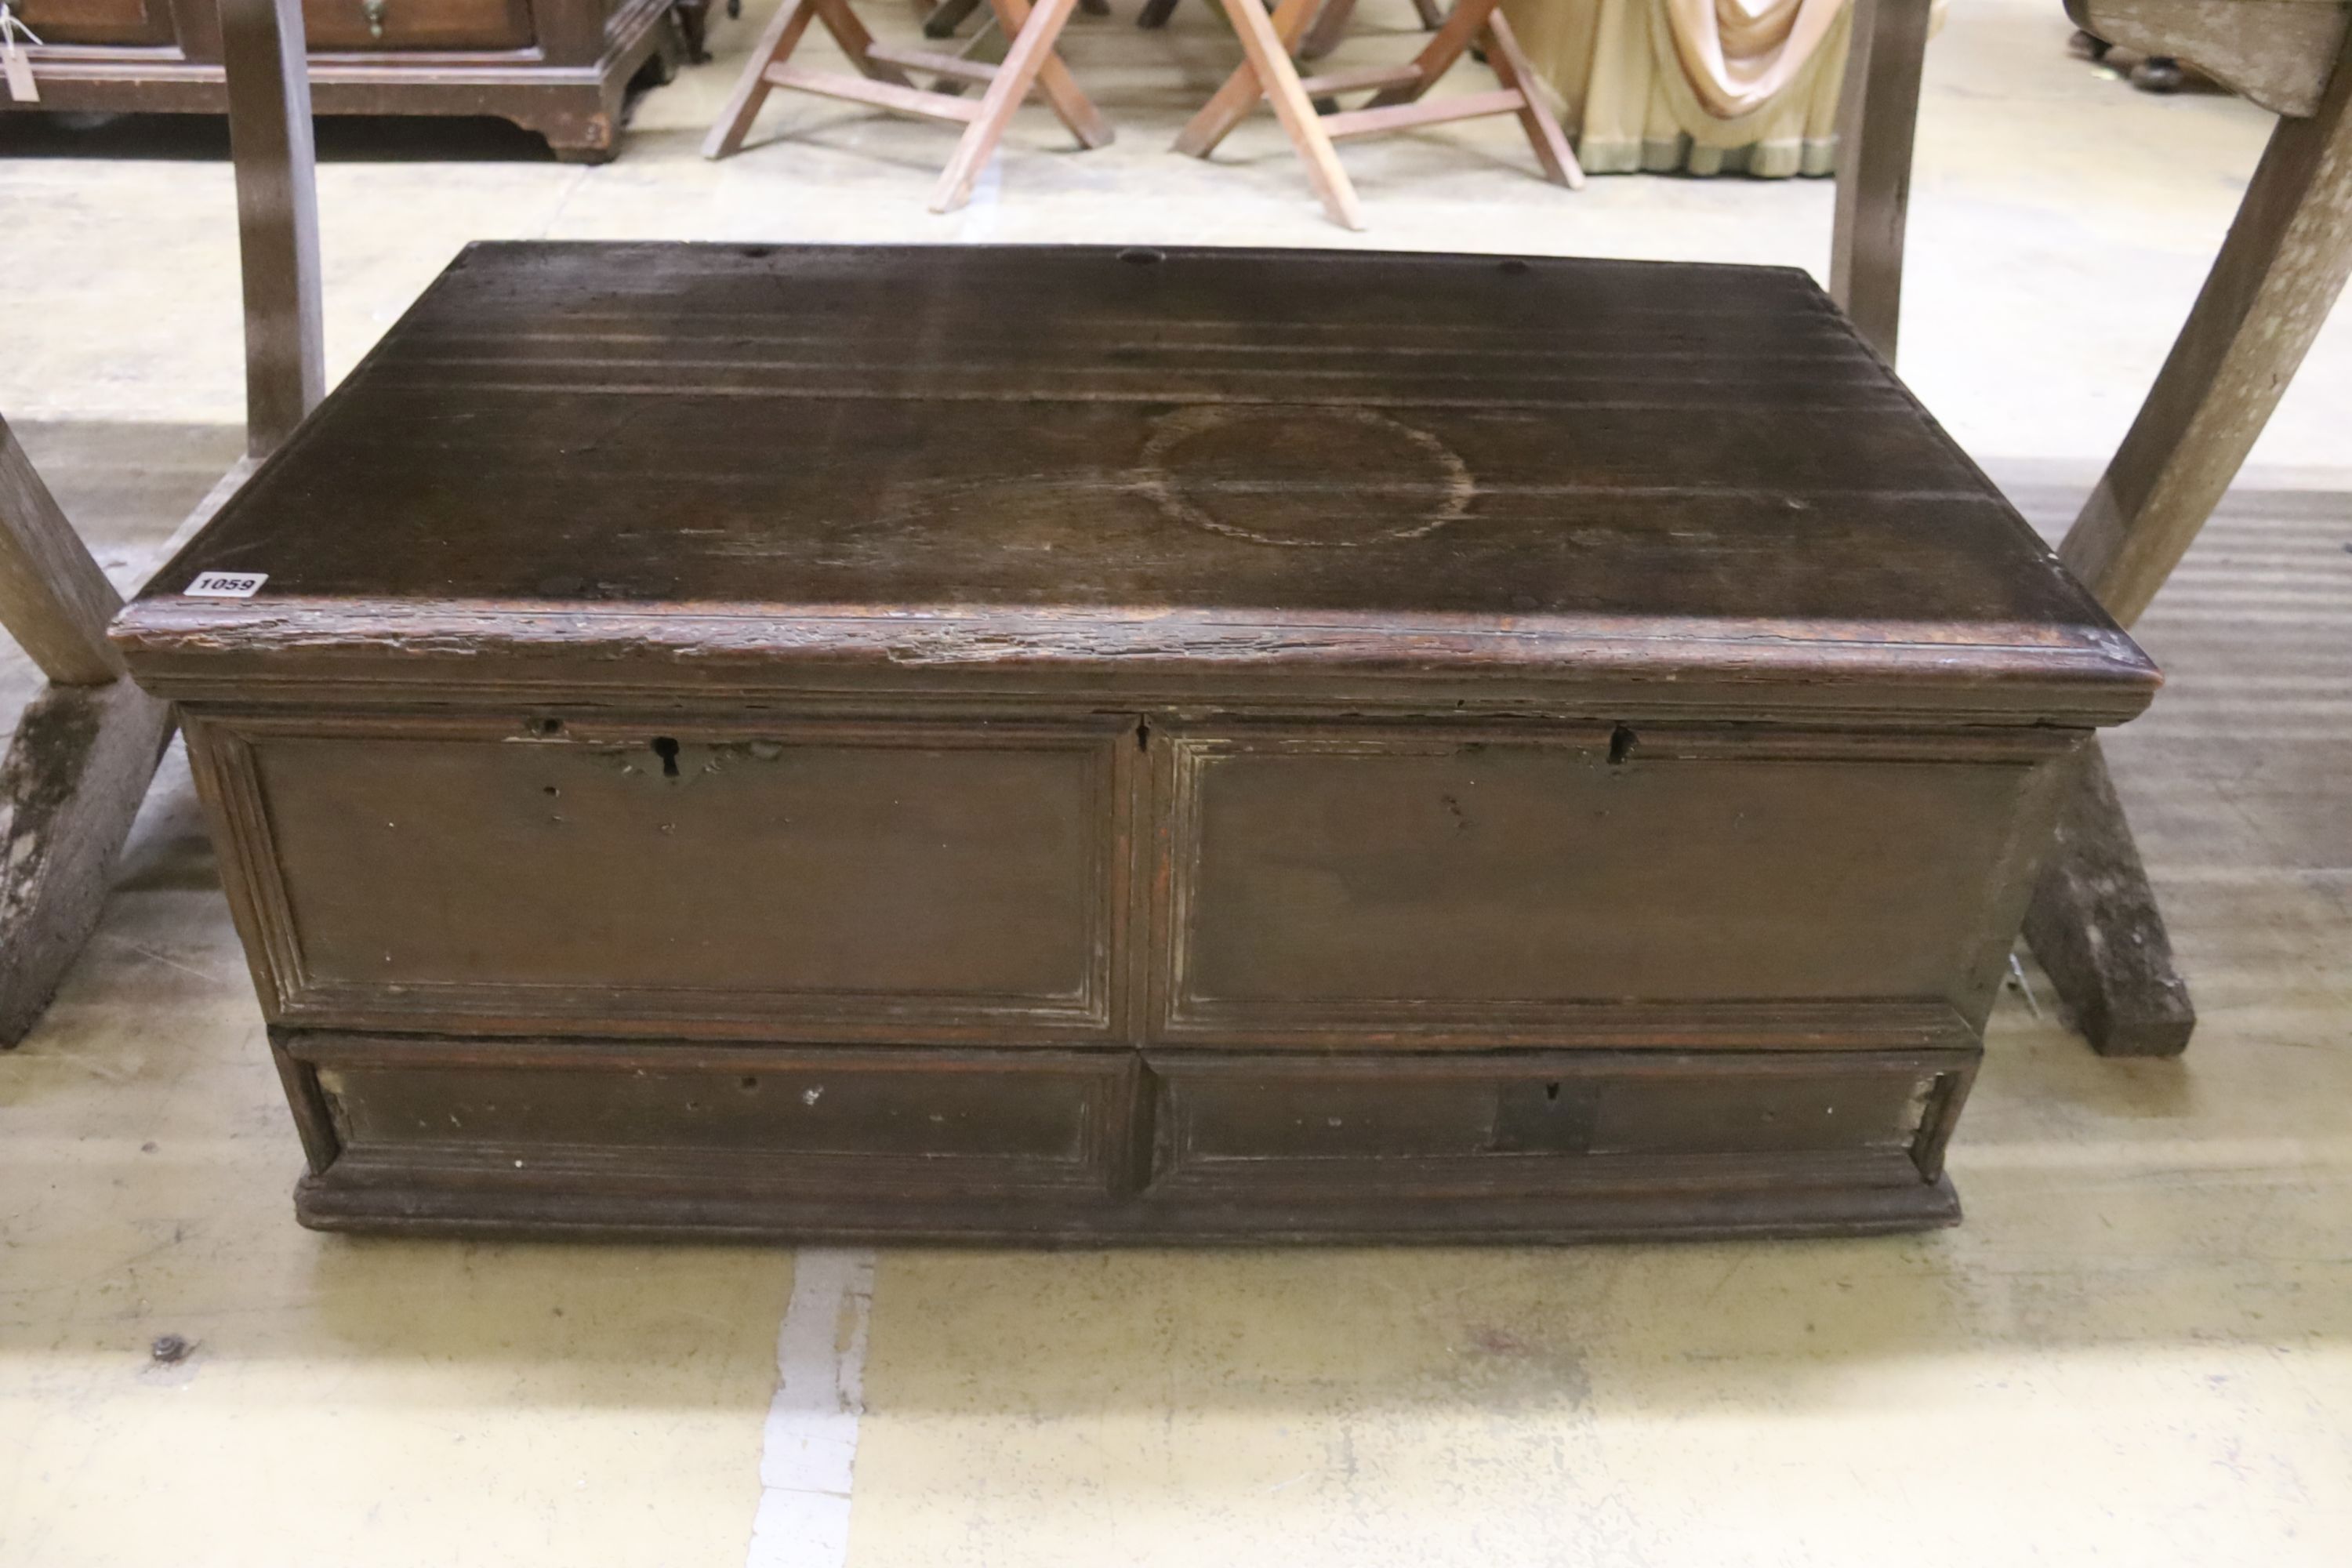 An 18th century oak trunk with dummy drawer front, width 92cm, depth 53cm, height 39cm